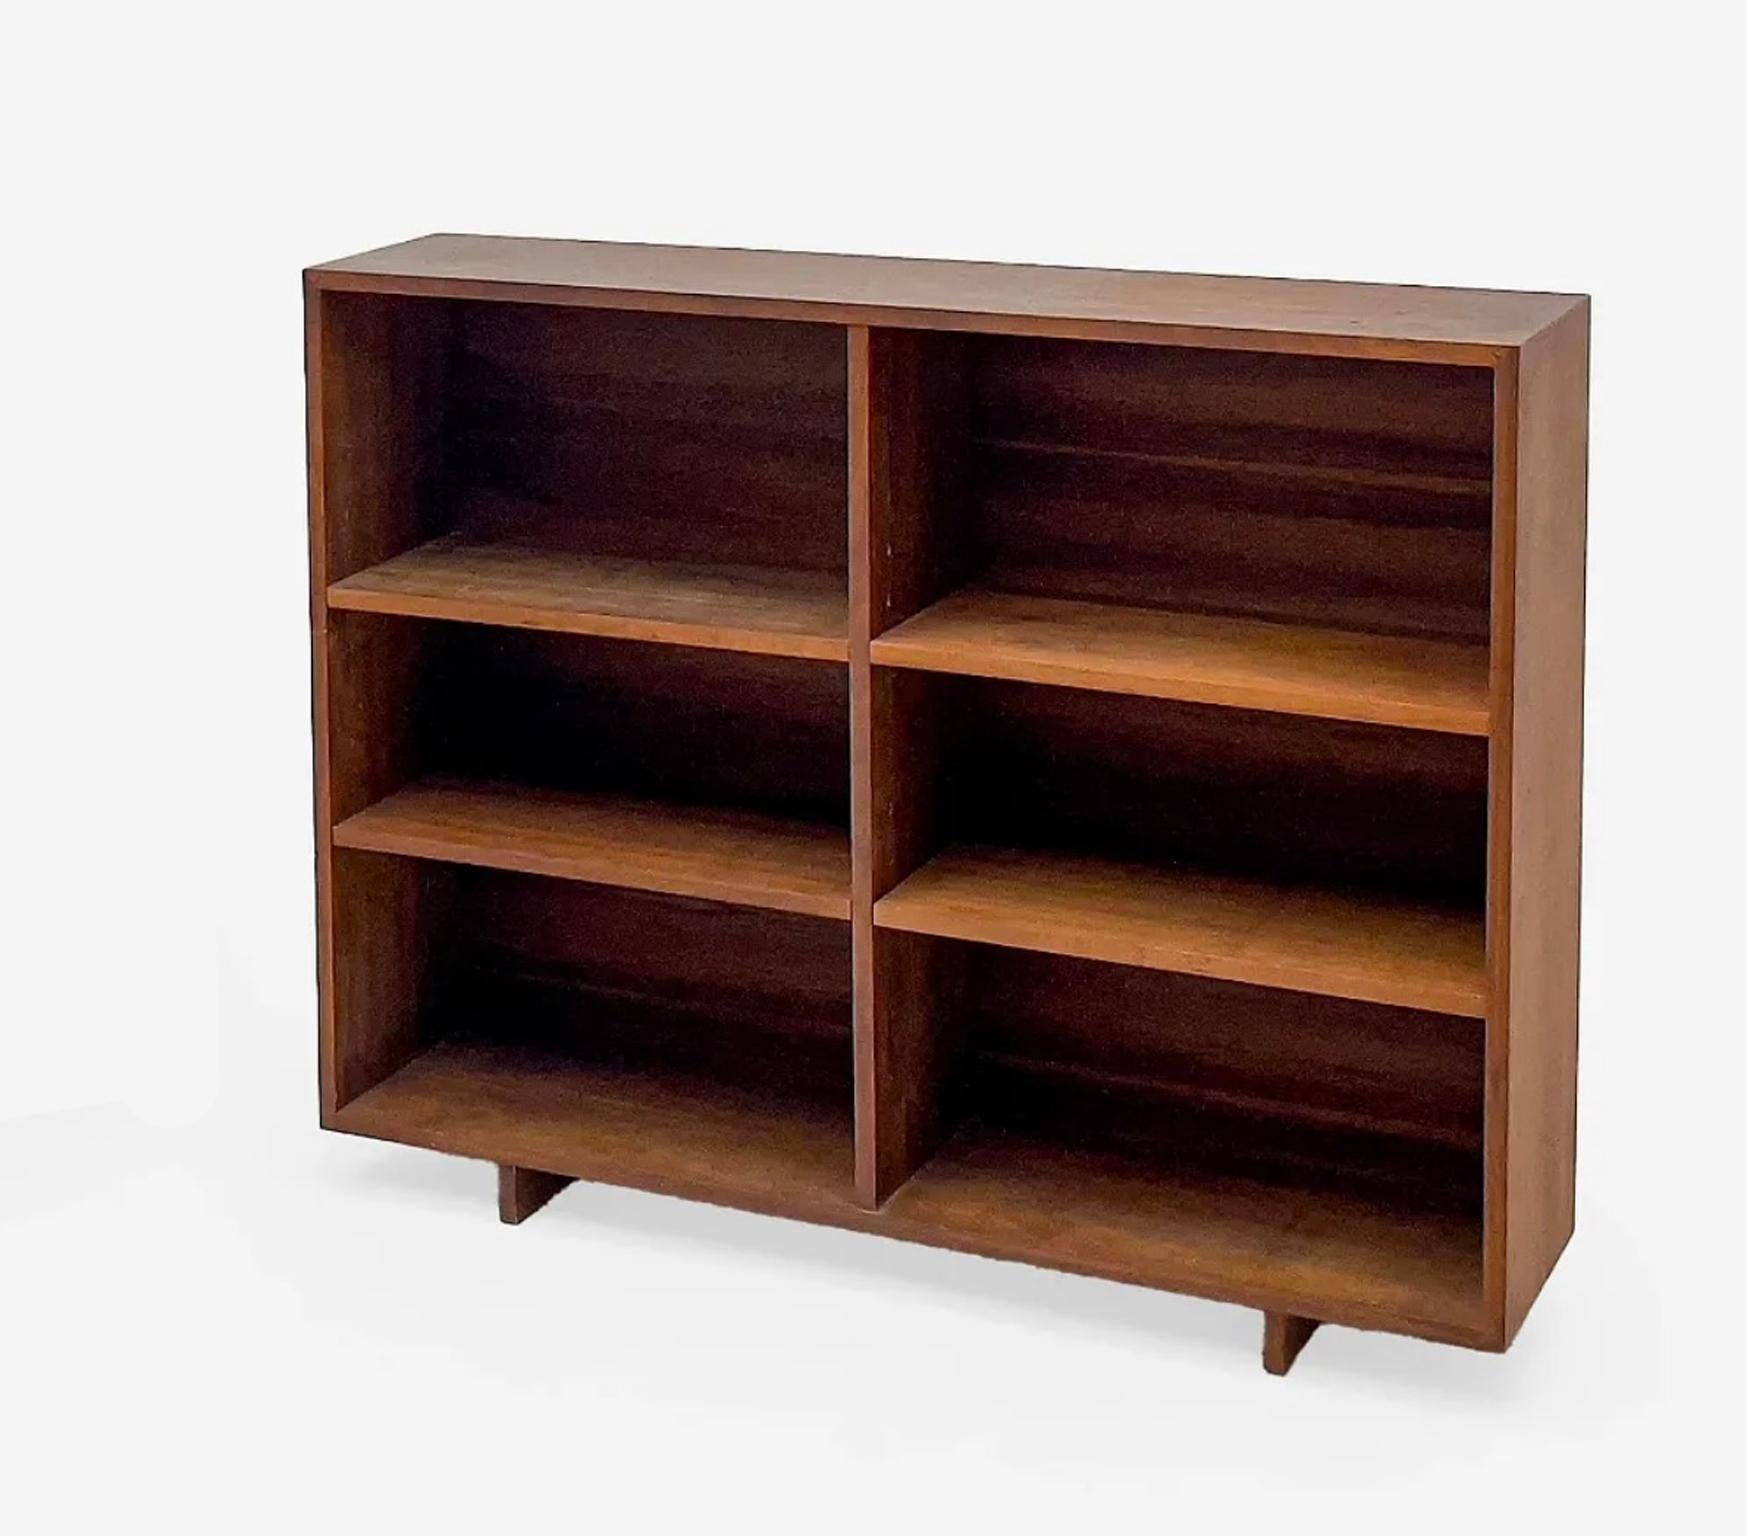 Mid century American Studio craft Richard Artschwager 6 shelf walnut low wide bookcase. Good vintage condition with beautiful walnut wood grains. Has 2 horizontal wood legs appears to float with adjustable shelves. clean inside and out with wood